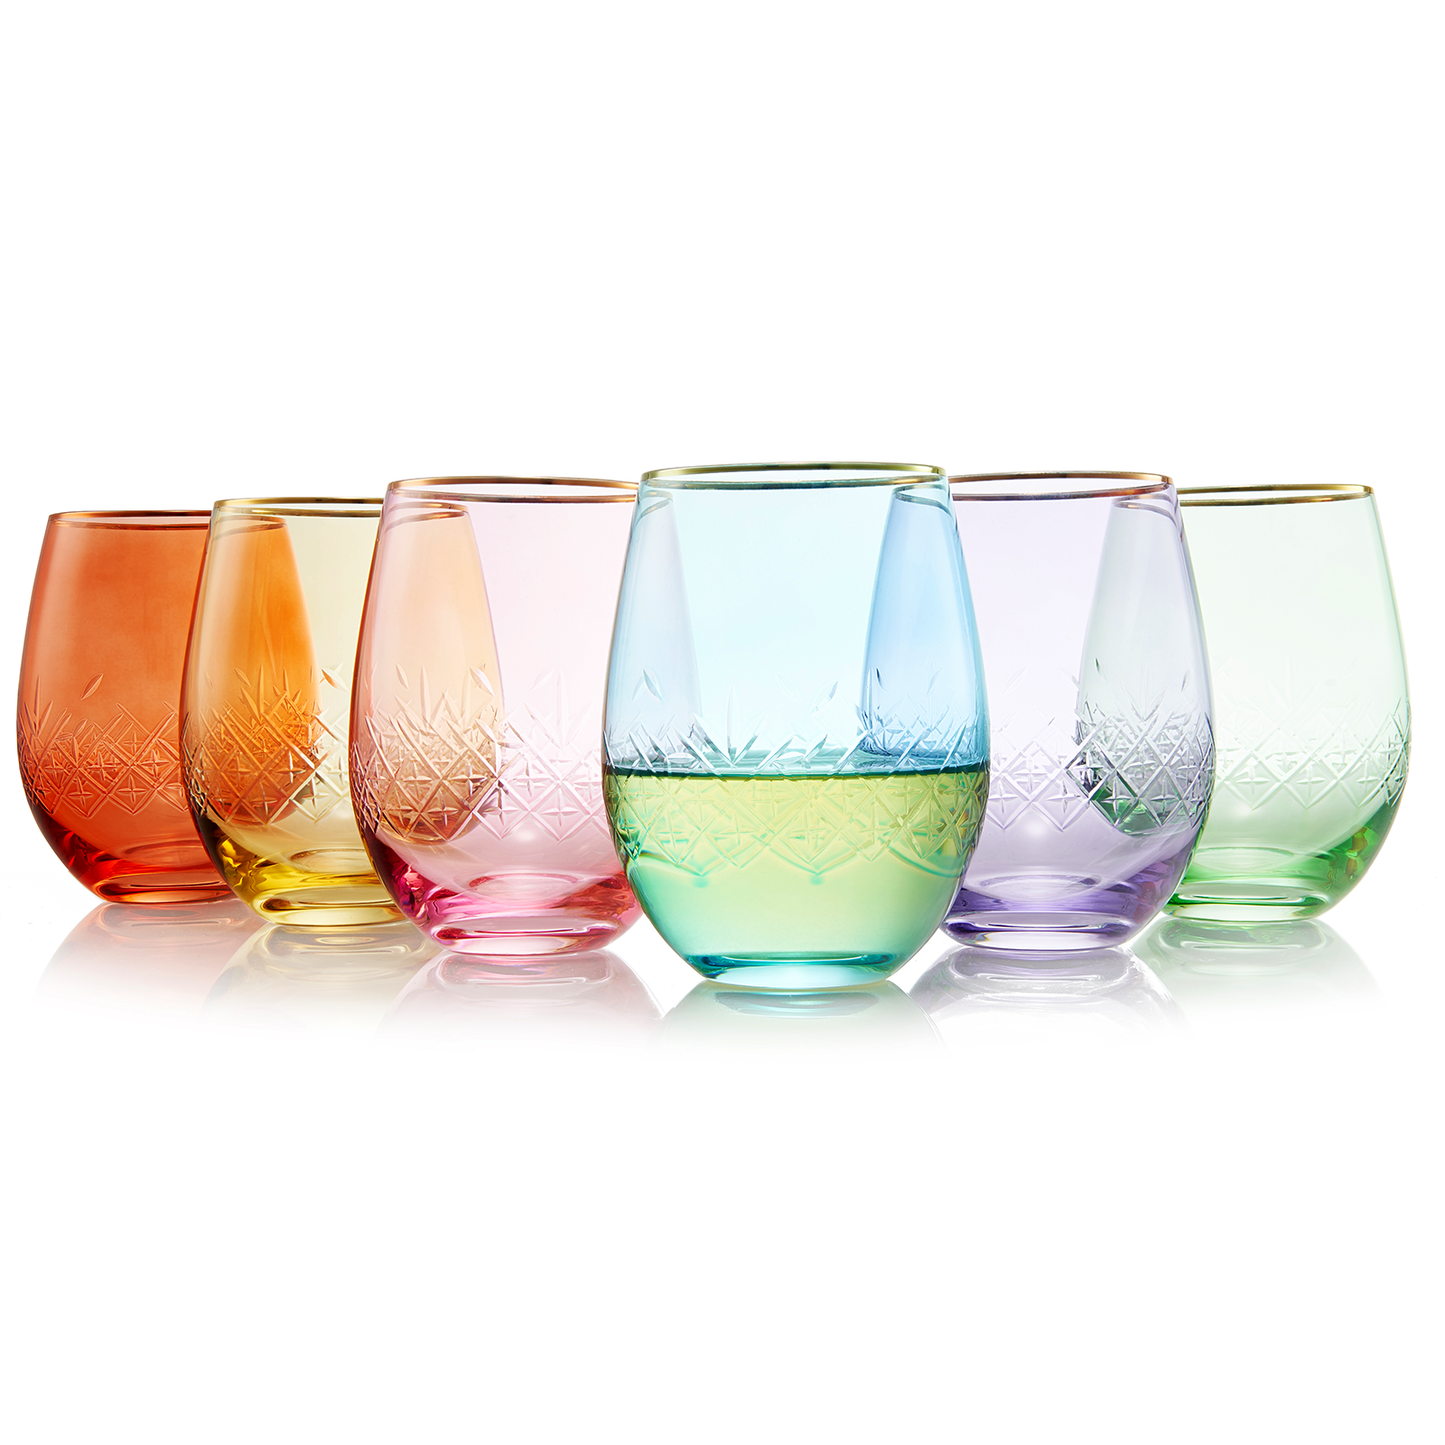 The Wine Savant - Art Deco Colored Crystal Stemless Wine Glass - Etched & Gold-Rimmed Set of 6 - 15 oz